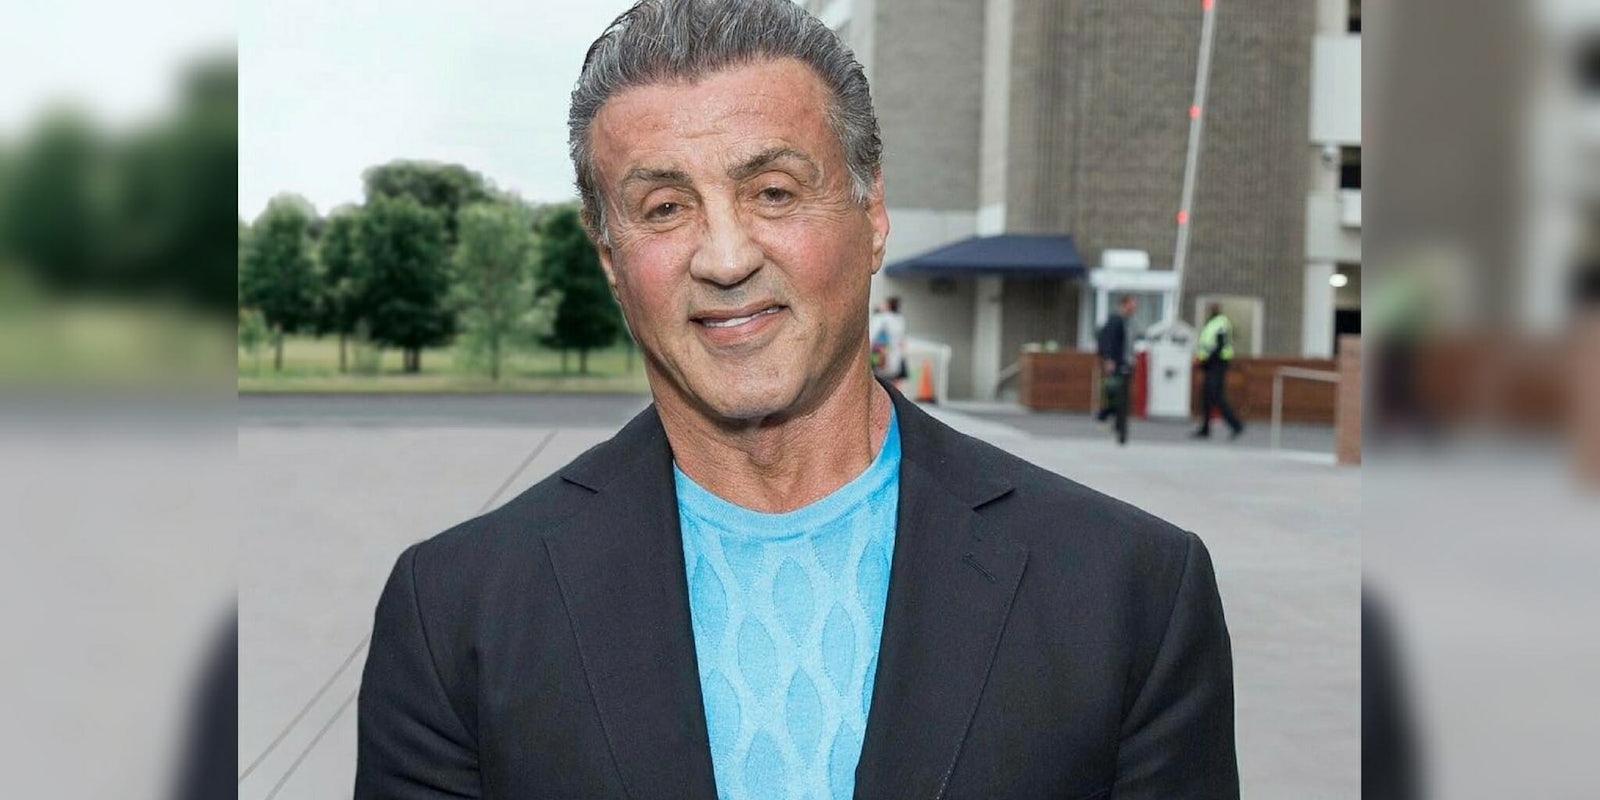 A police report says Sylvester Stallone coerced a 16-year-old into a threesome when she was 40